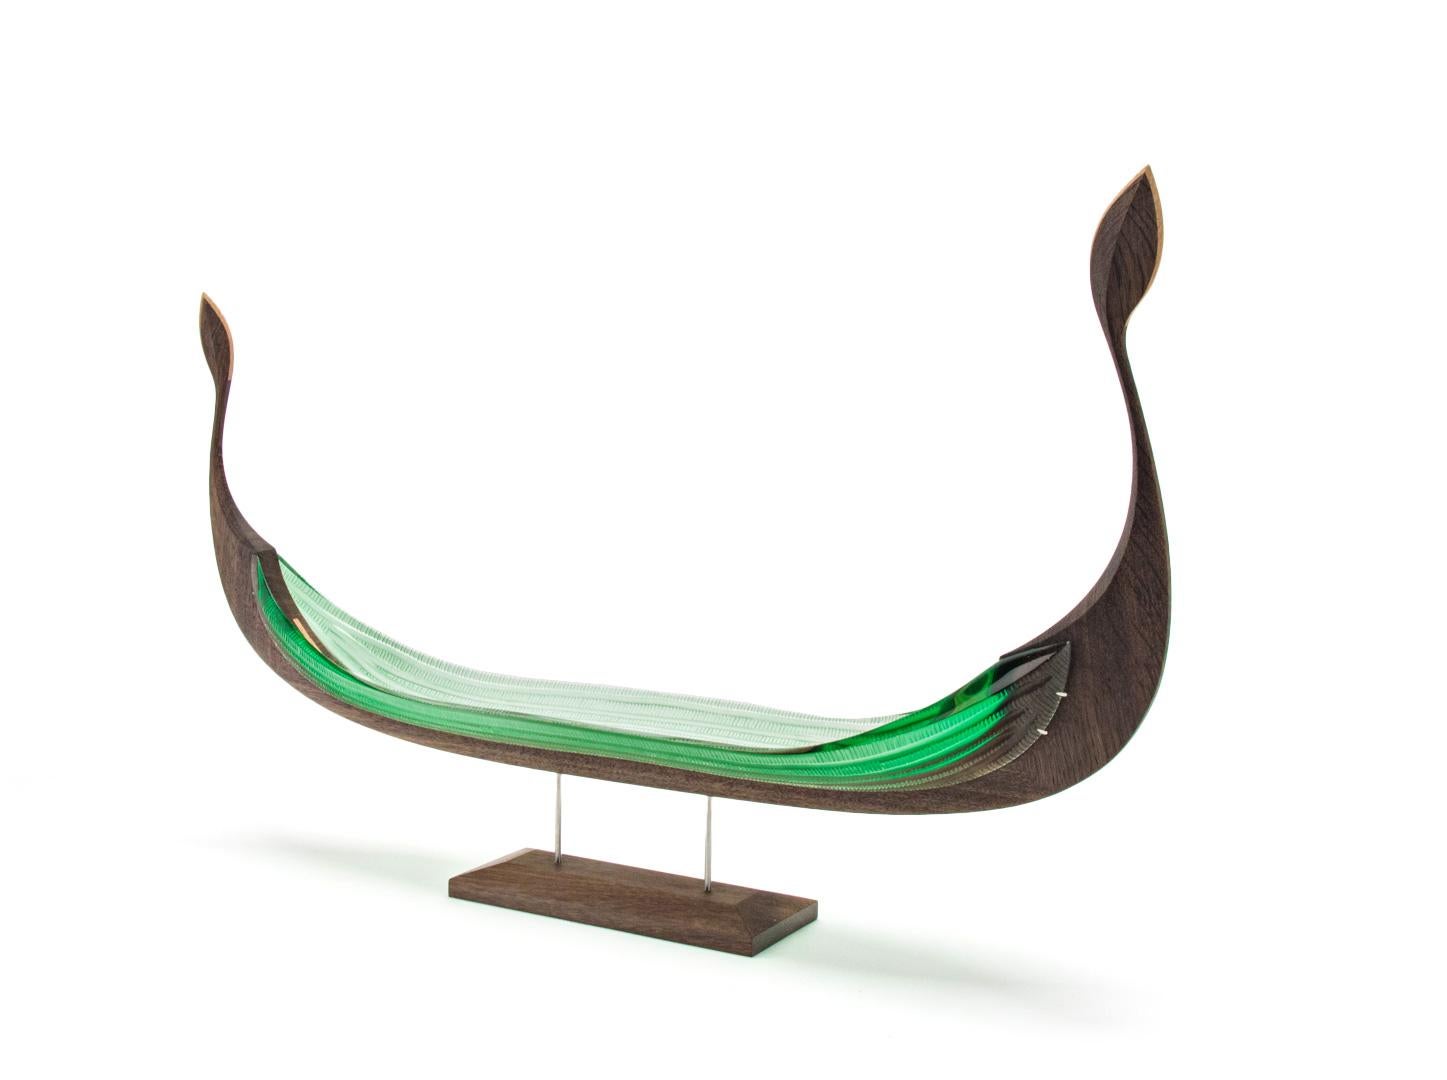 Audhumbla - Contemporary Sculpture by Backhaus & Brown and EgevÆrk